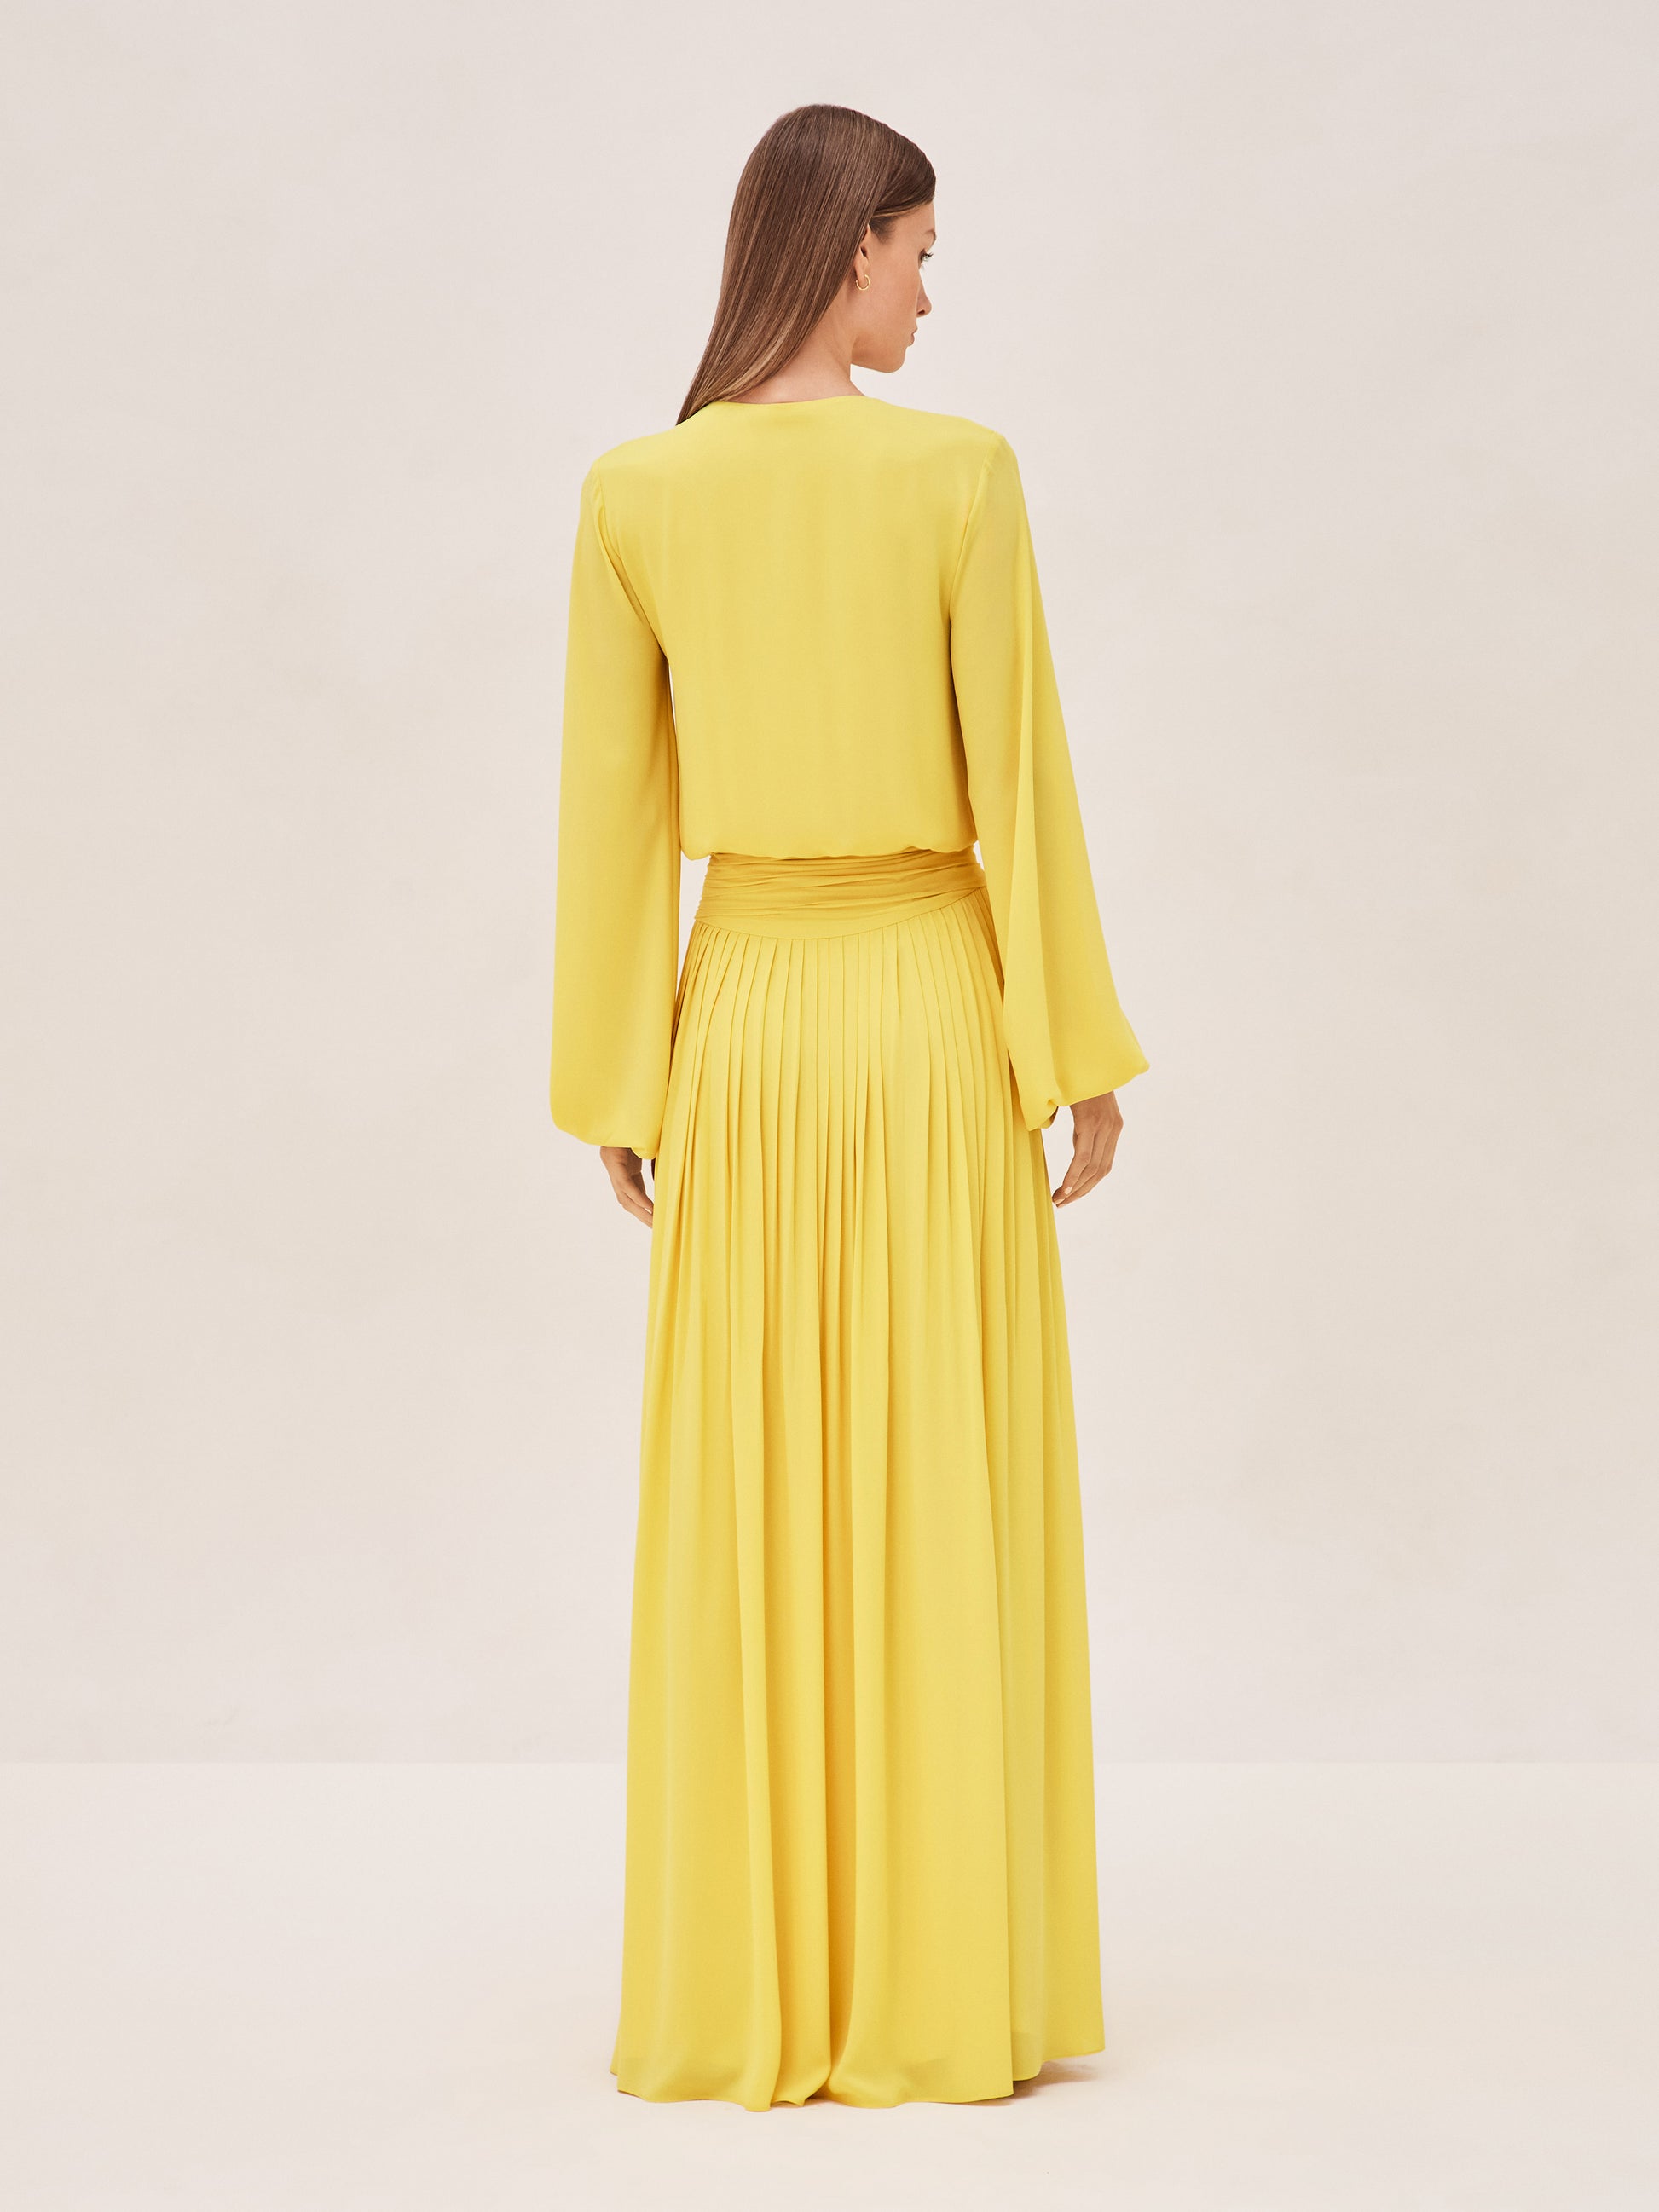 ALEXIS Diane Dress in yellow back image